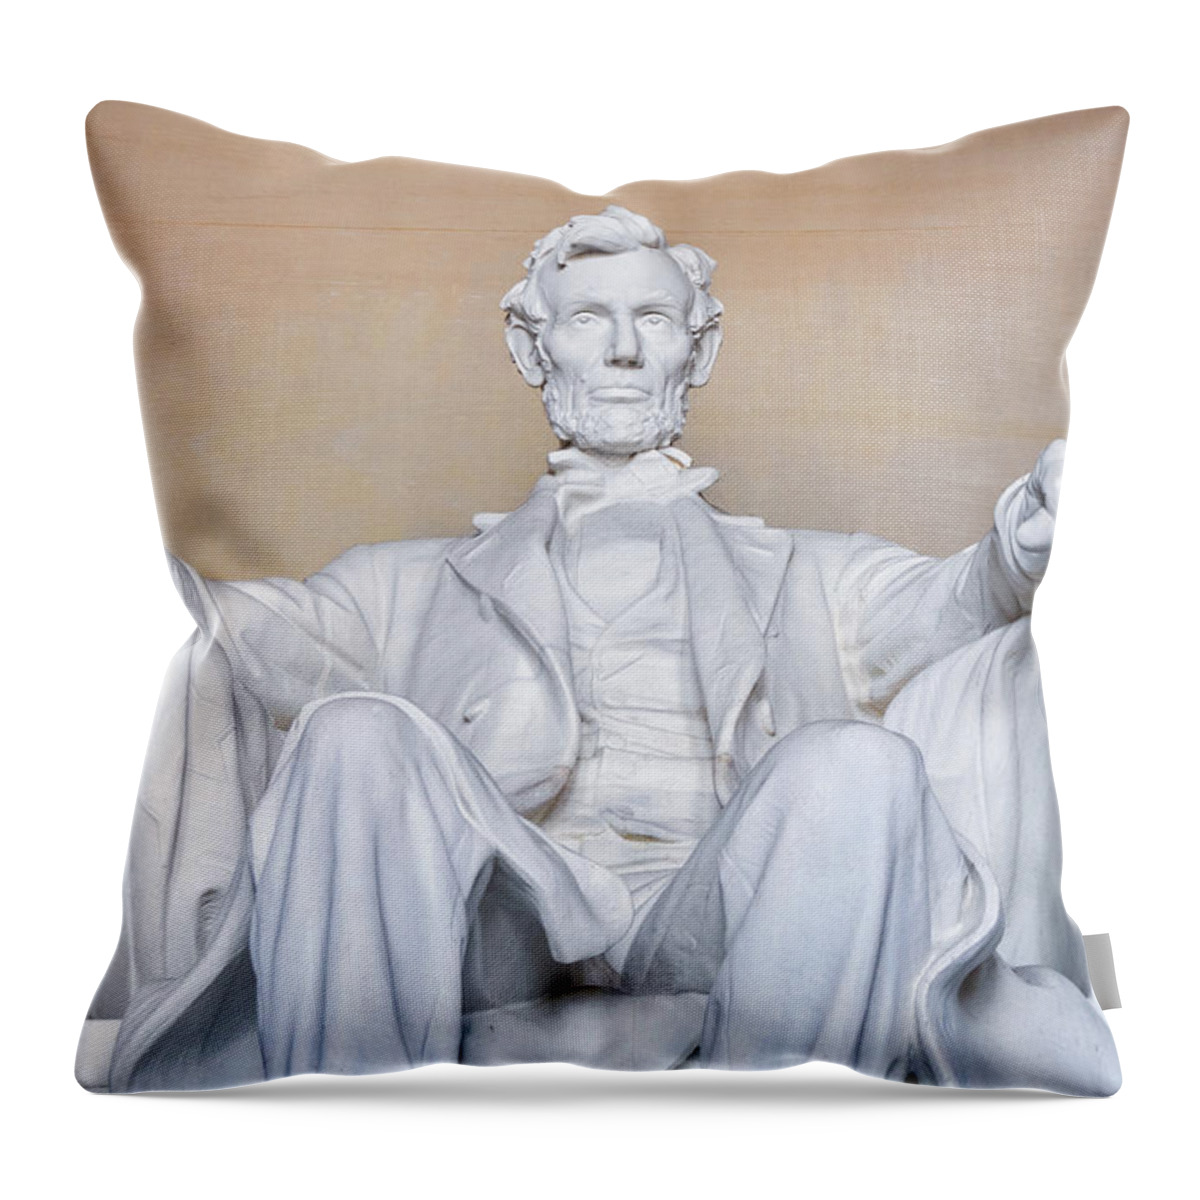 National Mall Throw Pillow featuring the photograph Lincoln Memorial by Kyle Hanson